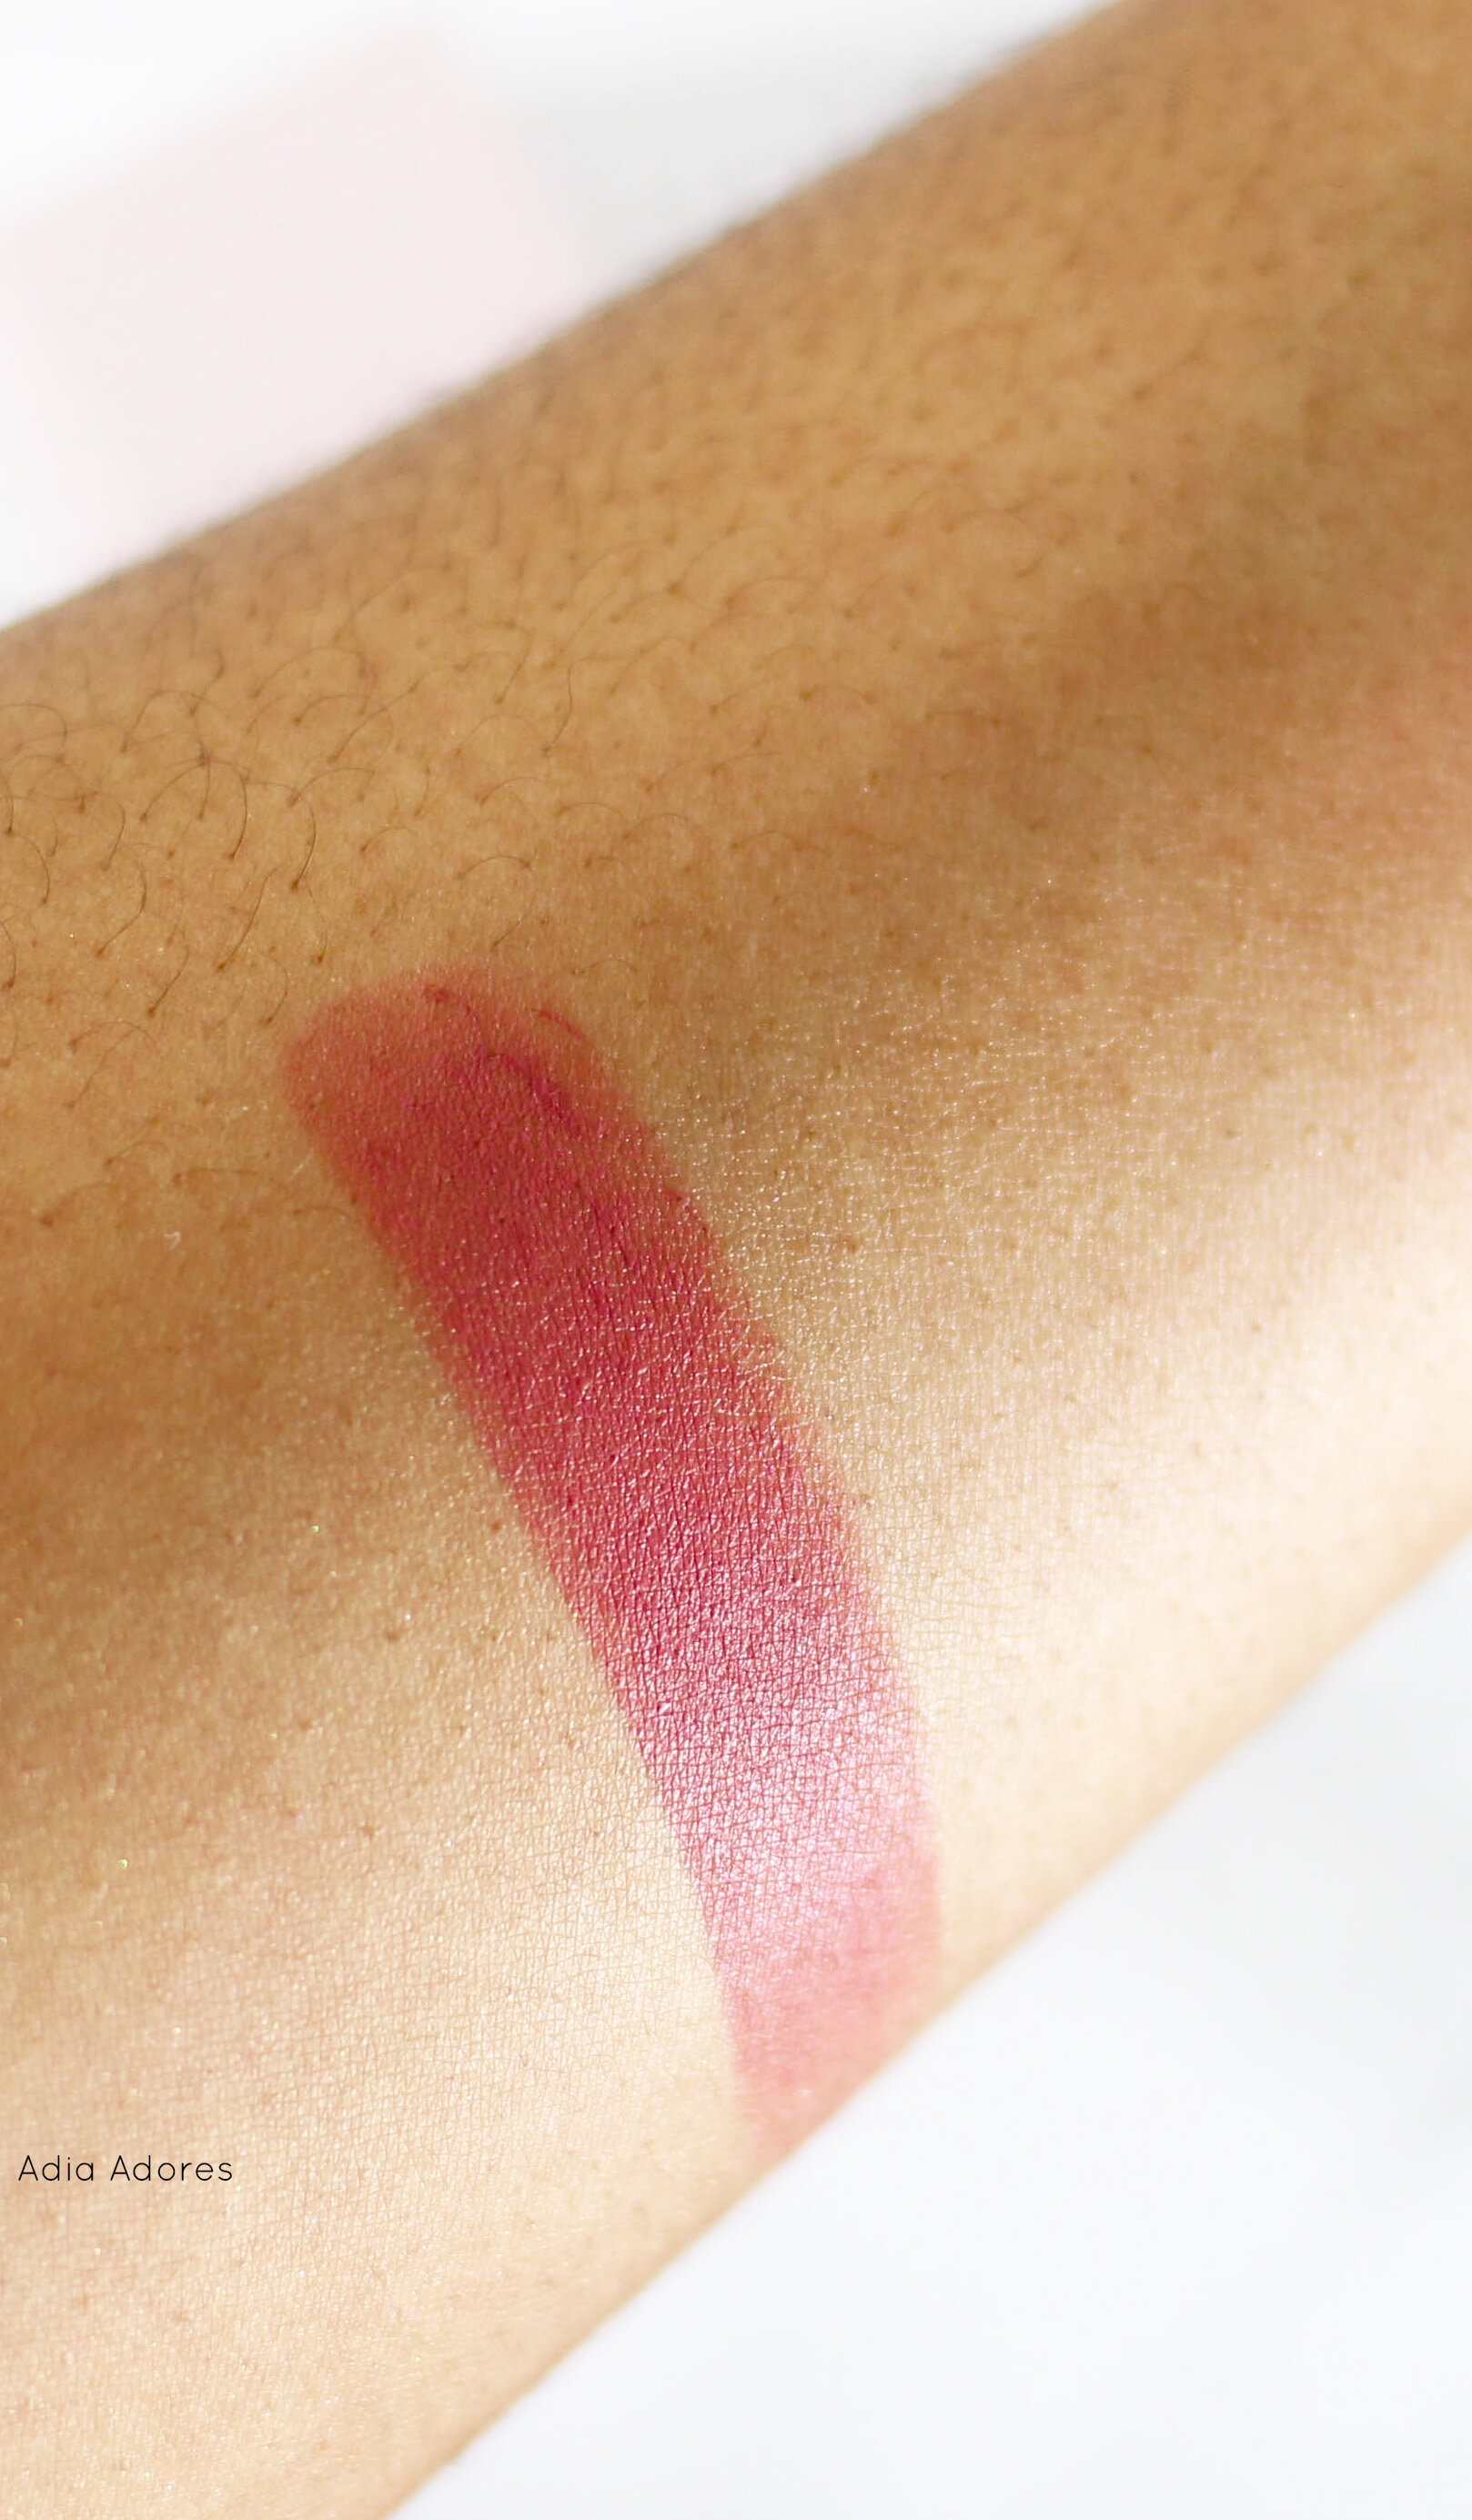 Here's a swatch of the super pretty Bite Beauty Multistick in Macaroon that I picked up during the Sephora VIB Haul. adiaadores.com